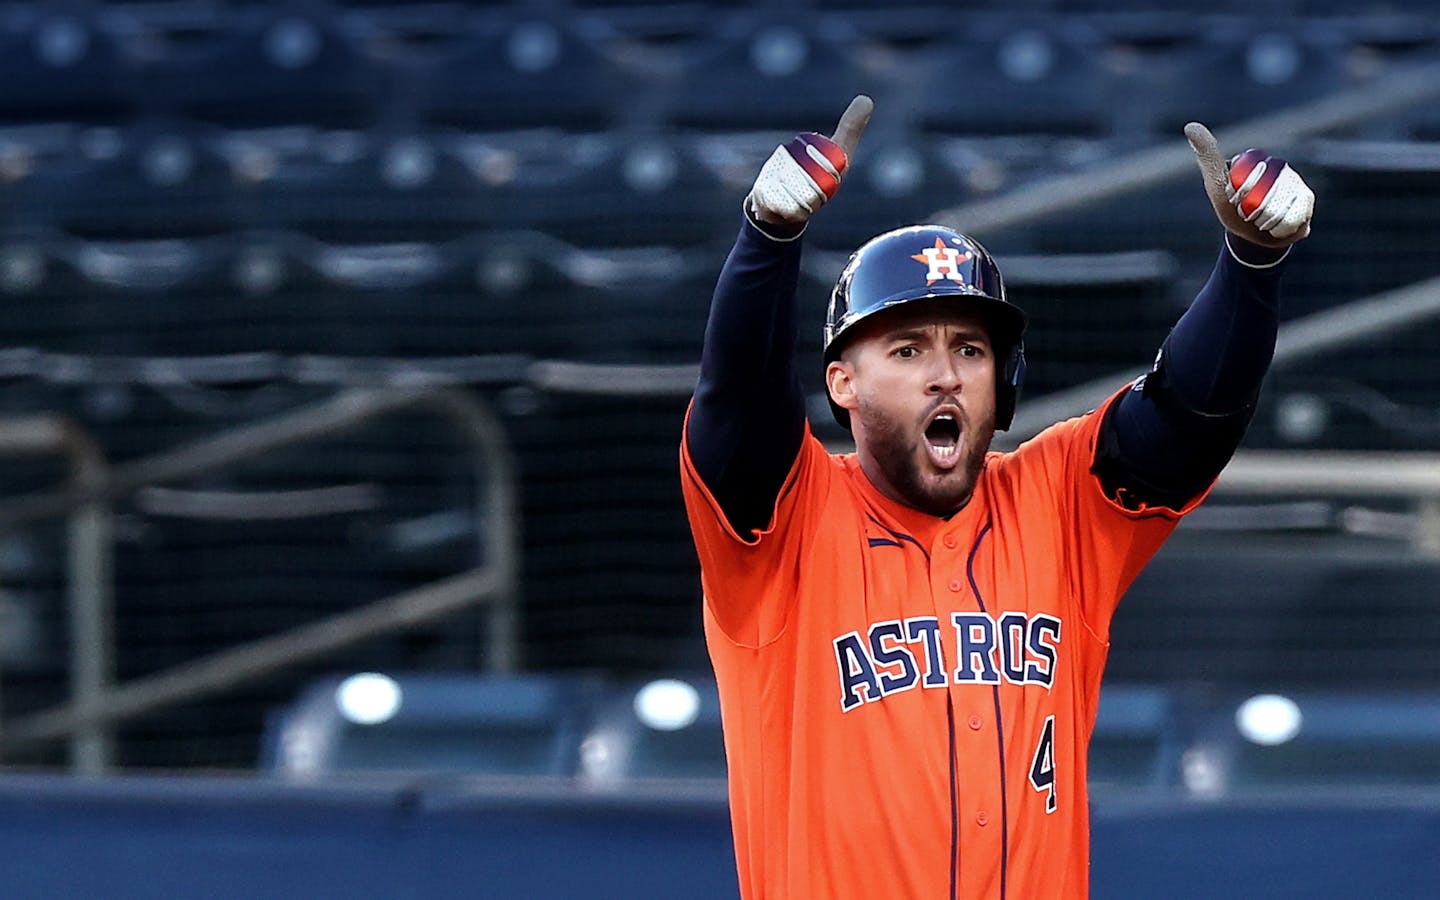 George Springer does not want to return to Astros?